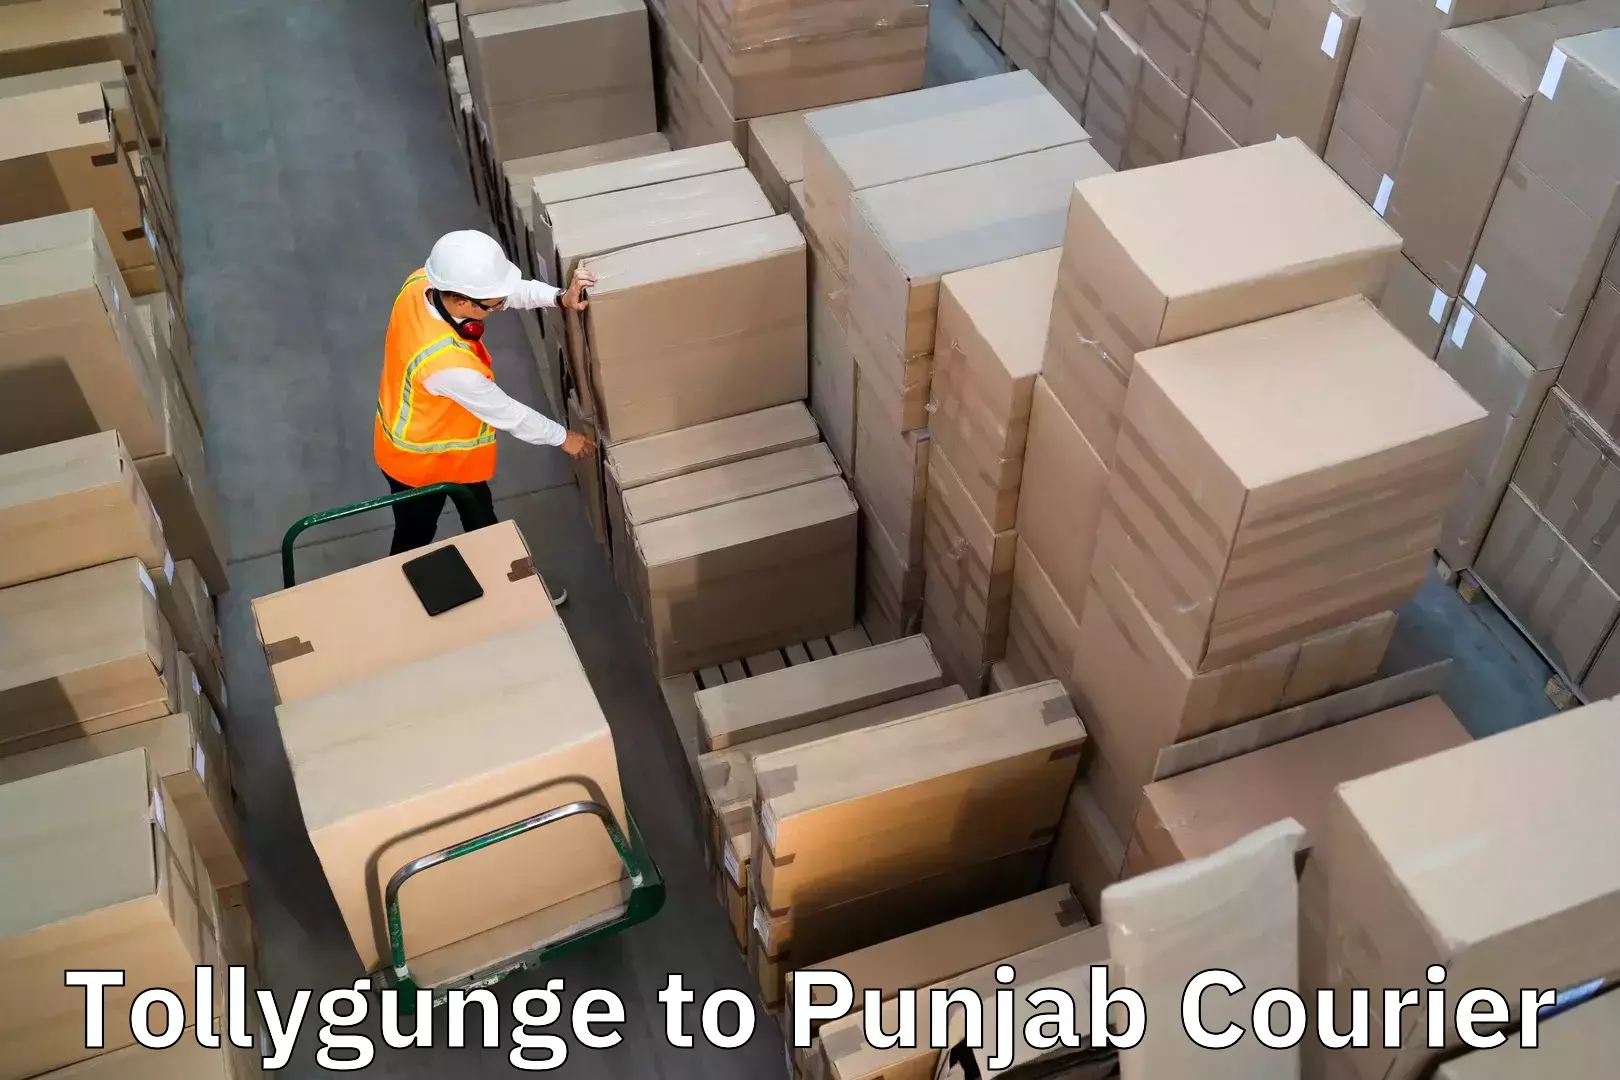 Baggage transport coordination in Tollygunge to Faridkot